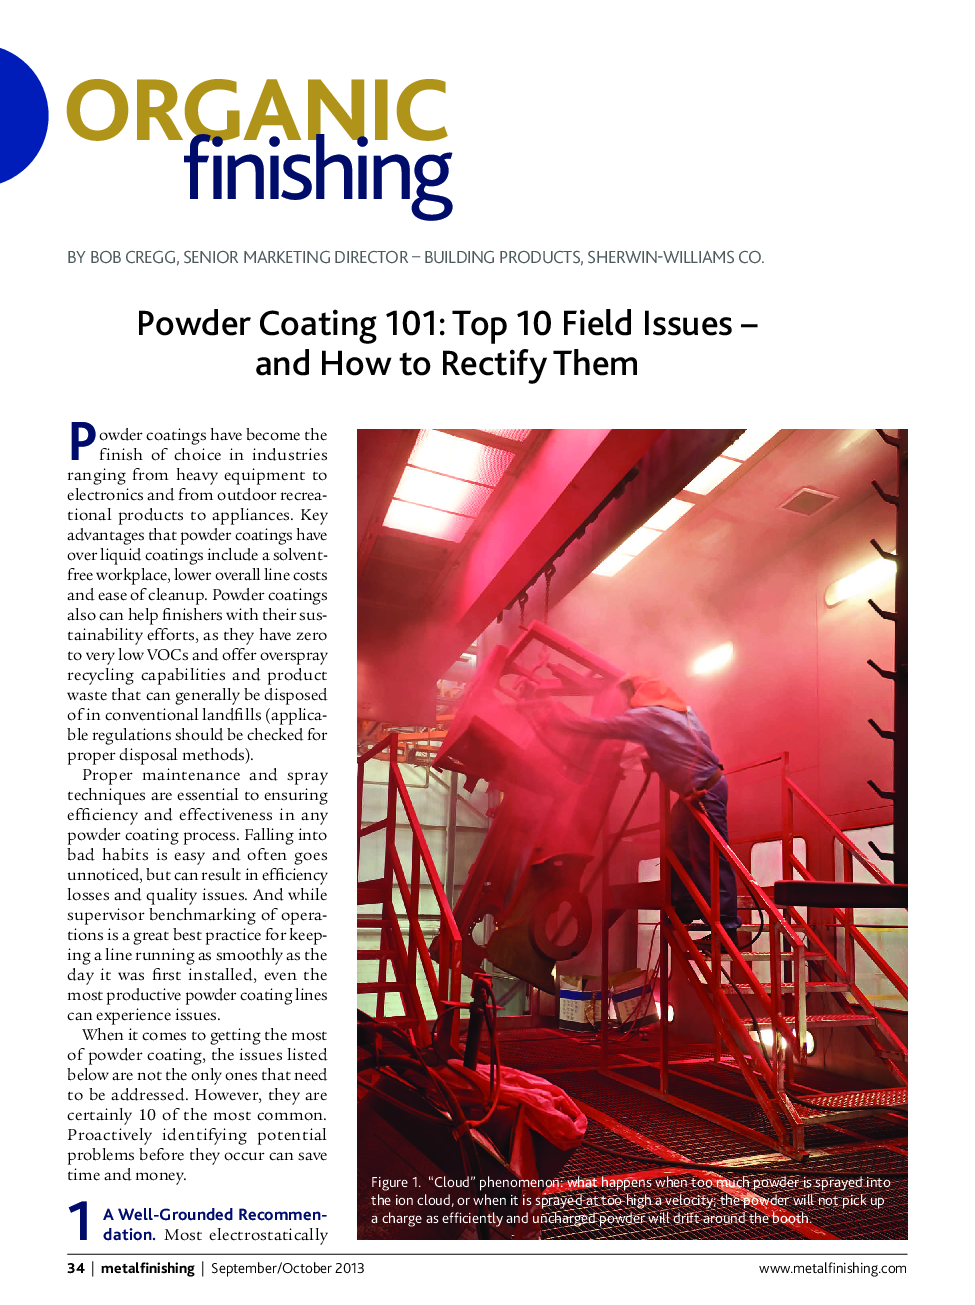 Powder Coating 101: Top 10 Field Issues - and How to Rectify Them